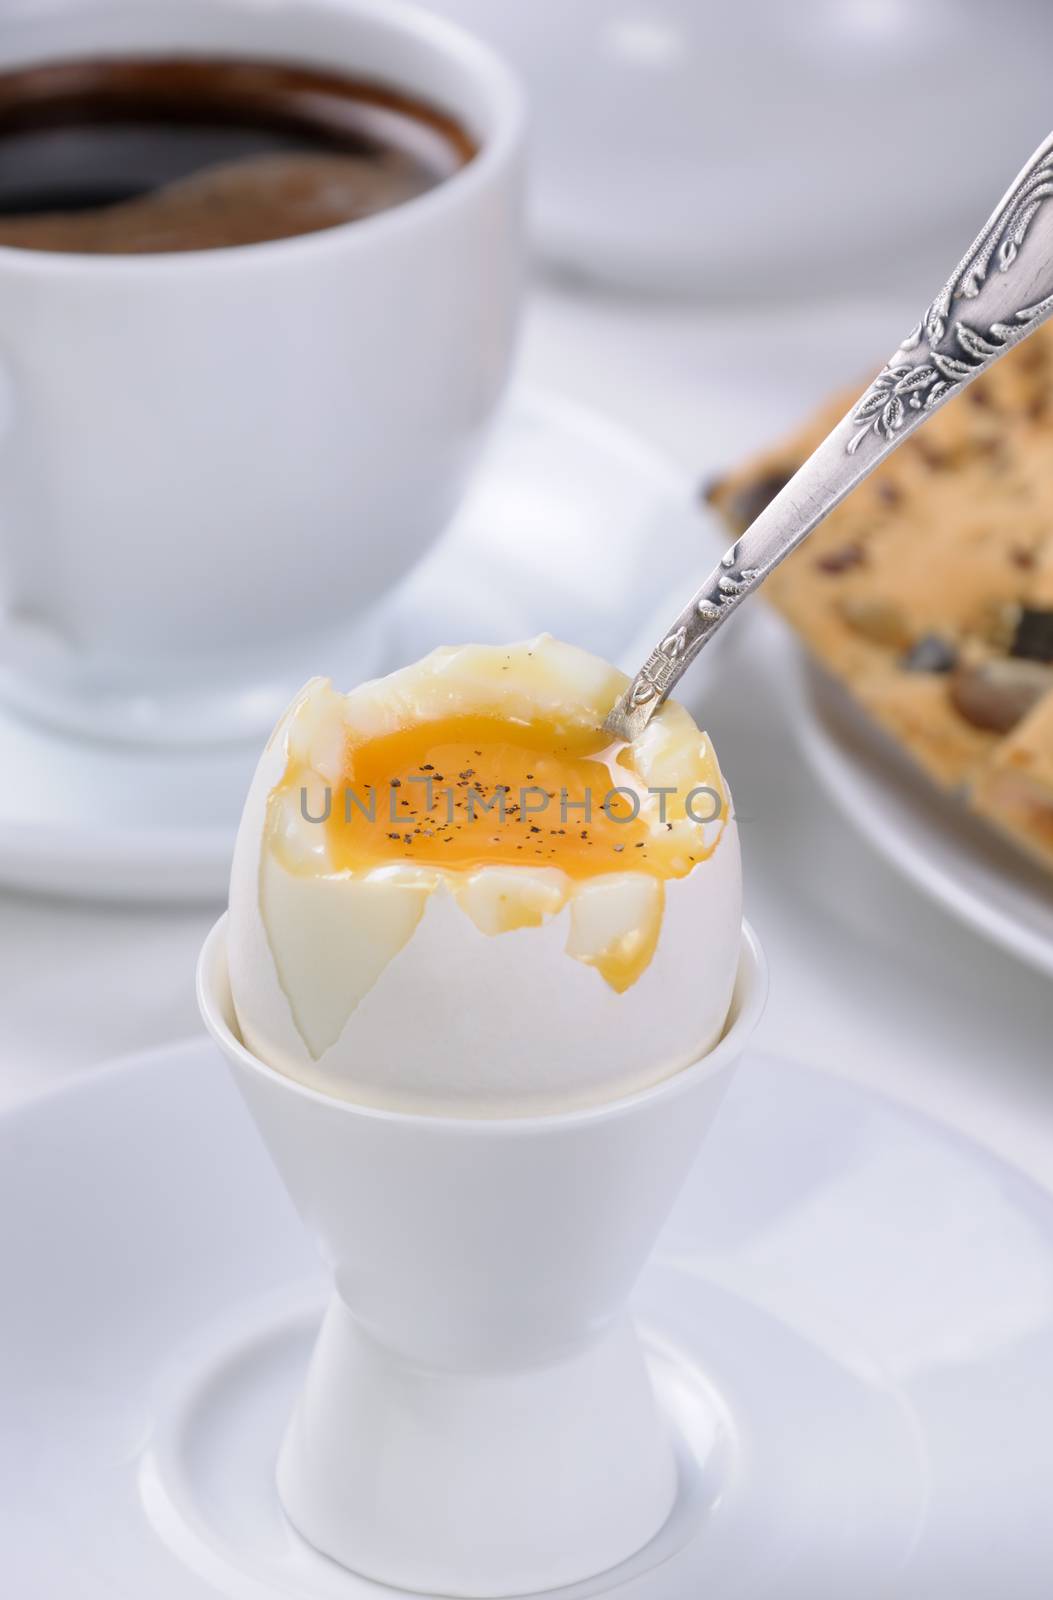 Soft-boiled egg with cup of coffee and crackers for breakfast